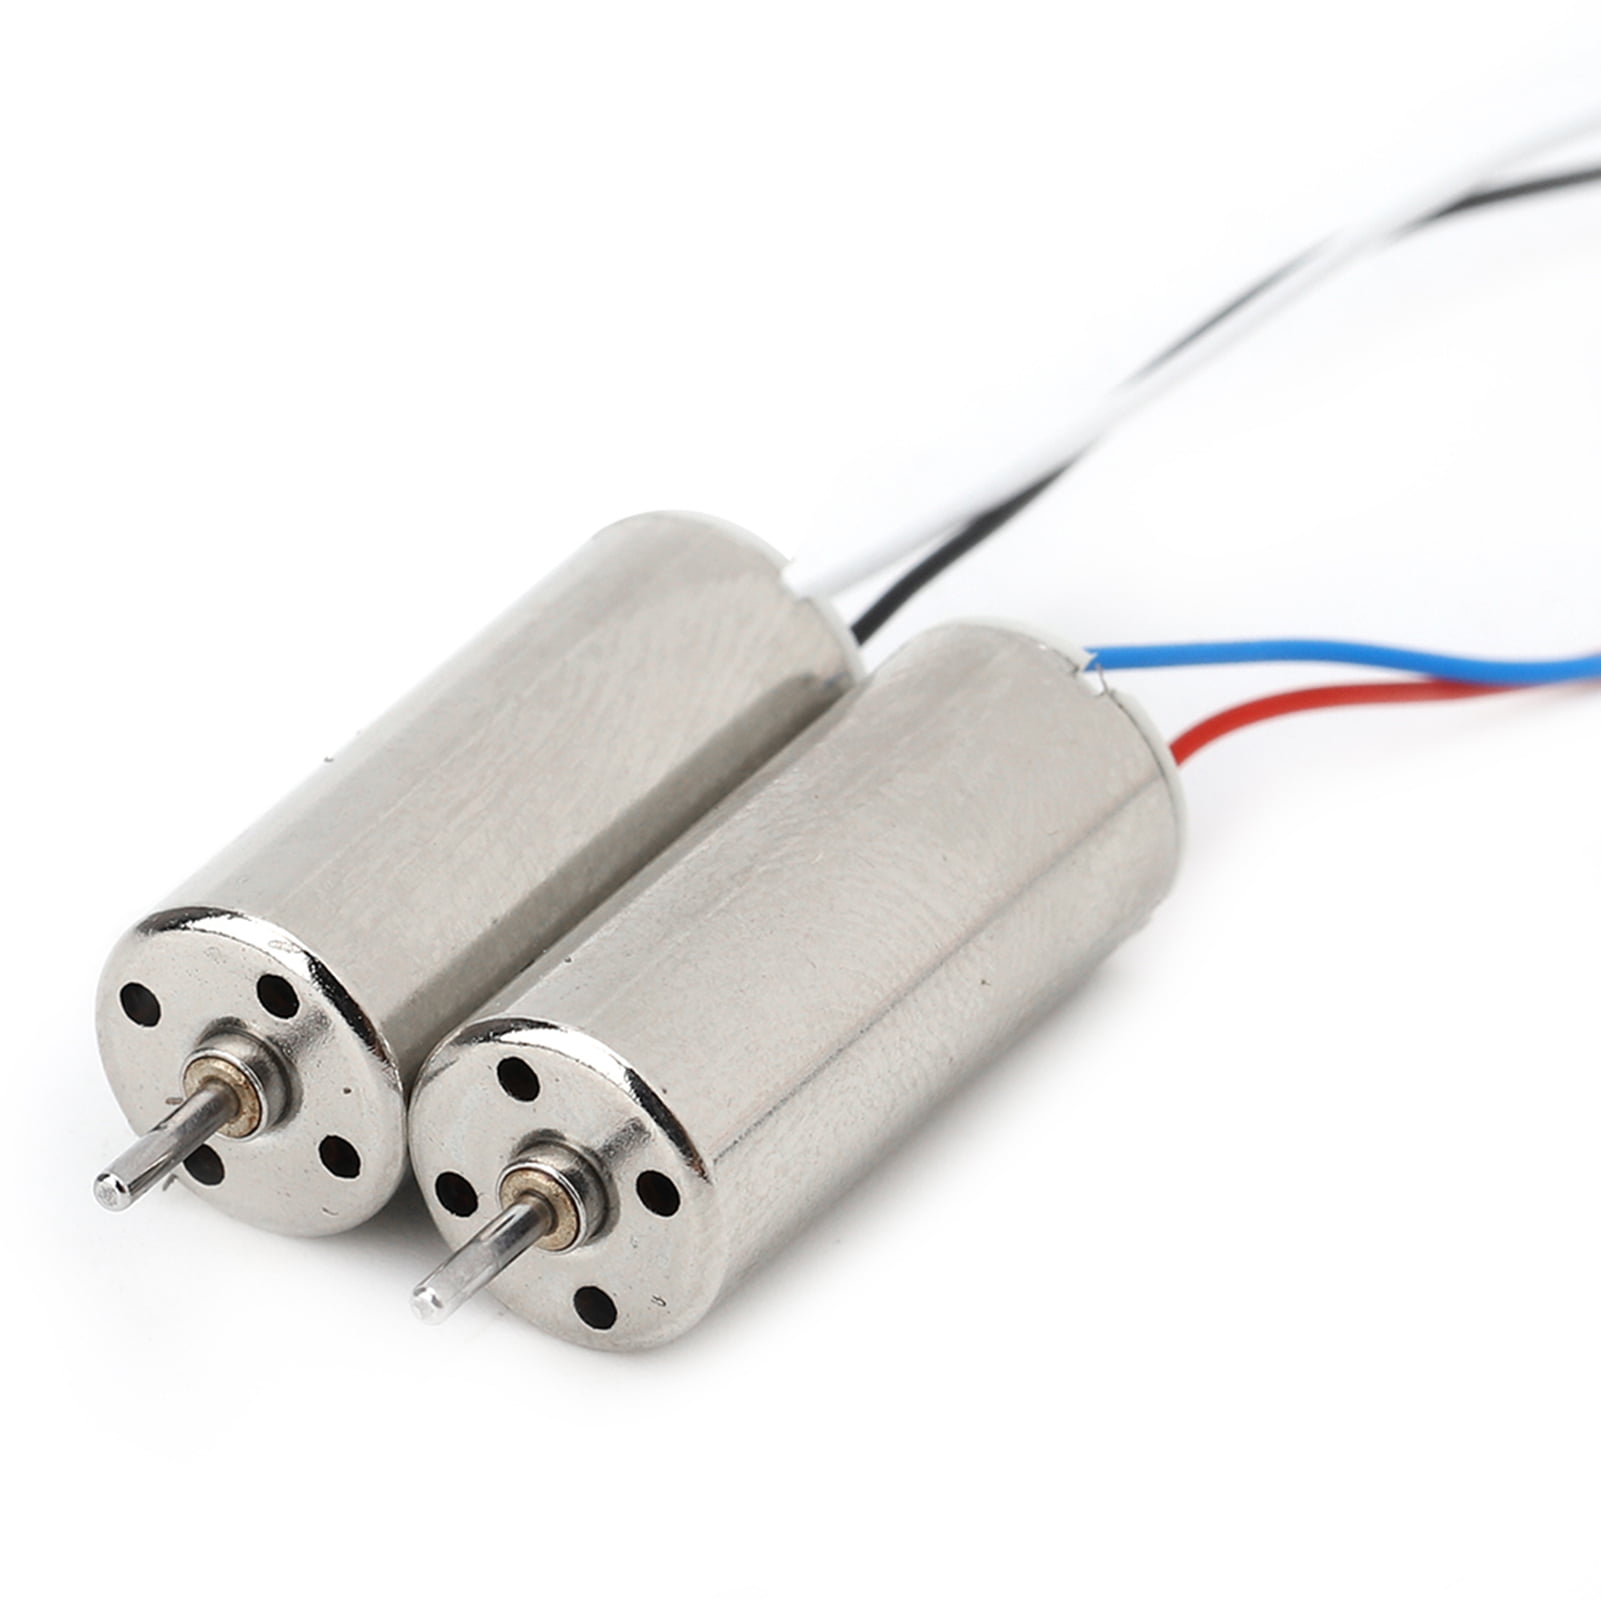 Compact Tail Motor for 3-5V Drones